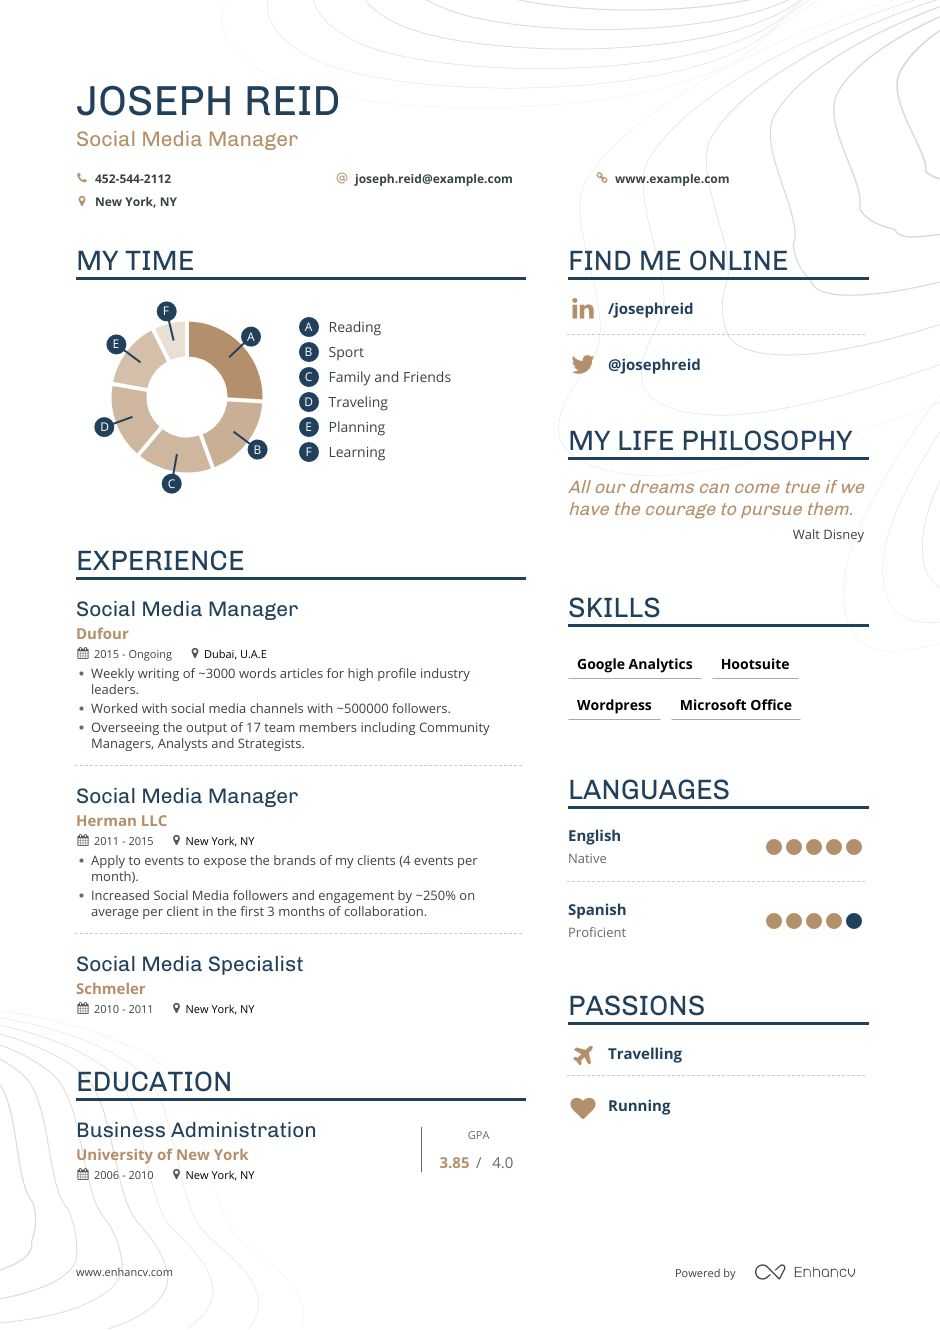 Social Media Manager Resume Examples Skills Templates Amp More For 2020